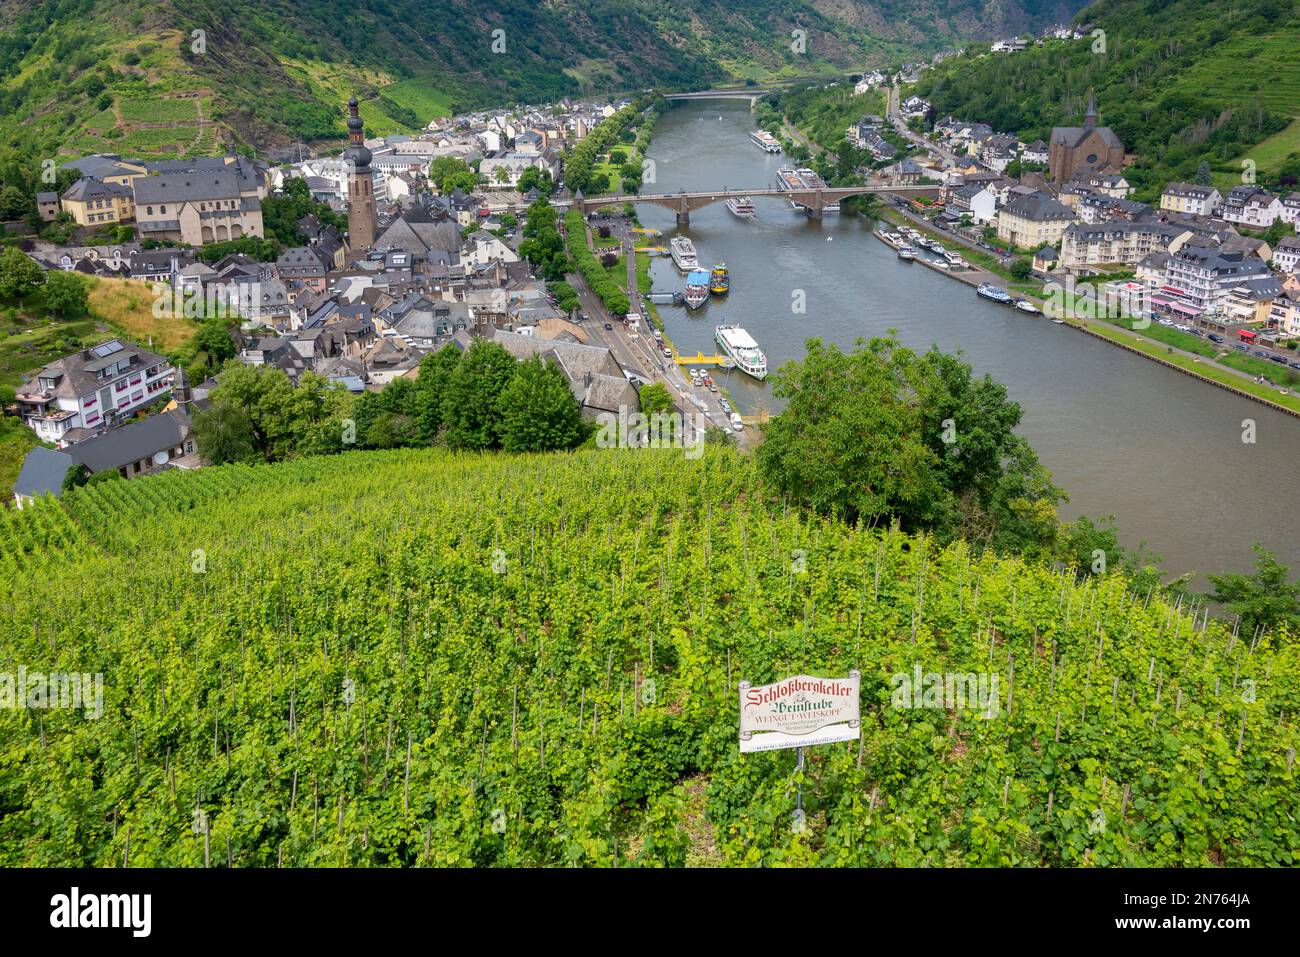 Germany, Rhineland-Palatinate, Cochem-Zell Moselle, Cochem, smallest county town in Germany Stock Photo